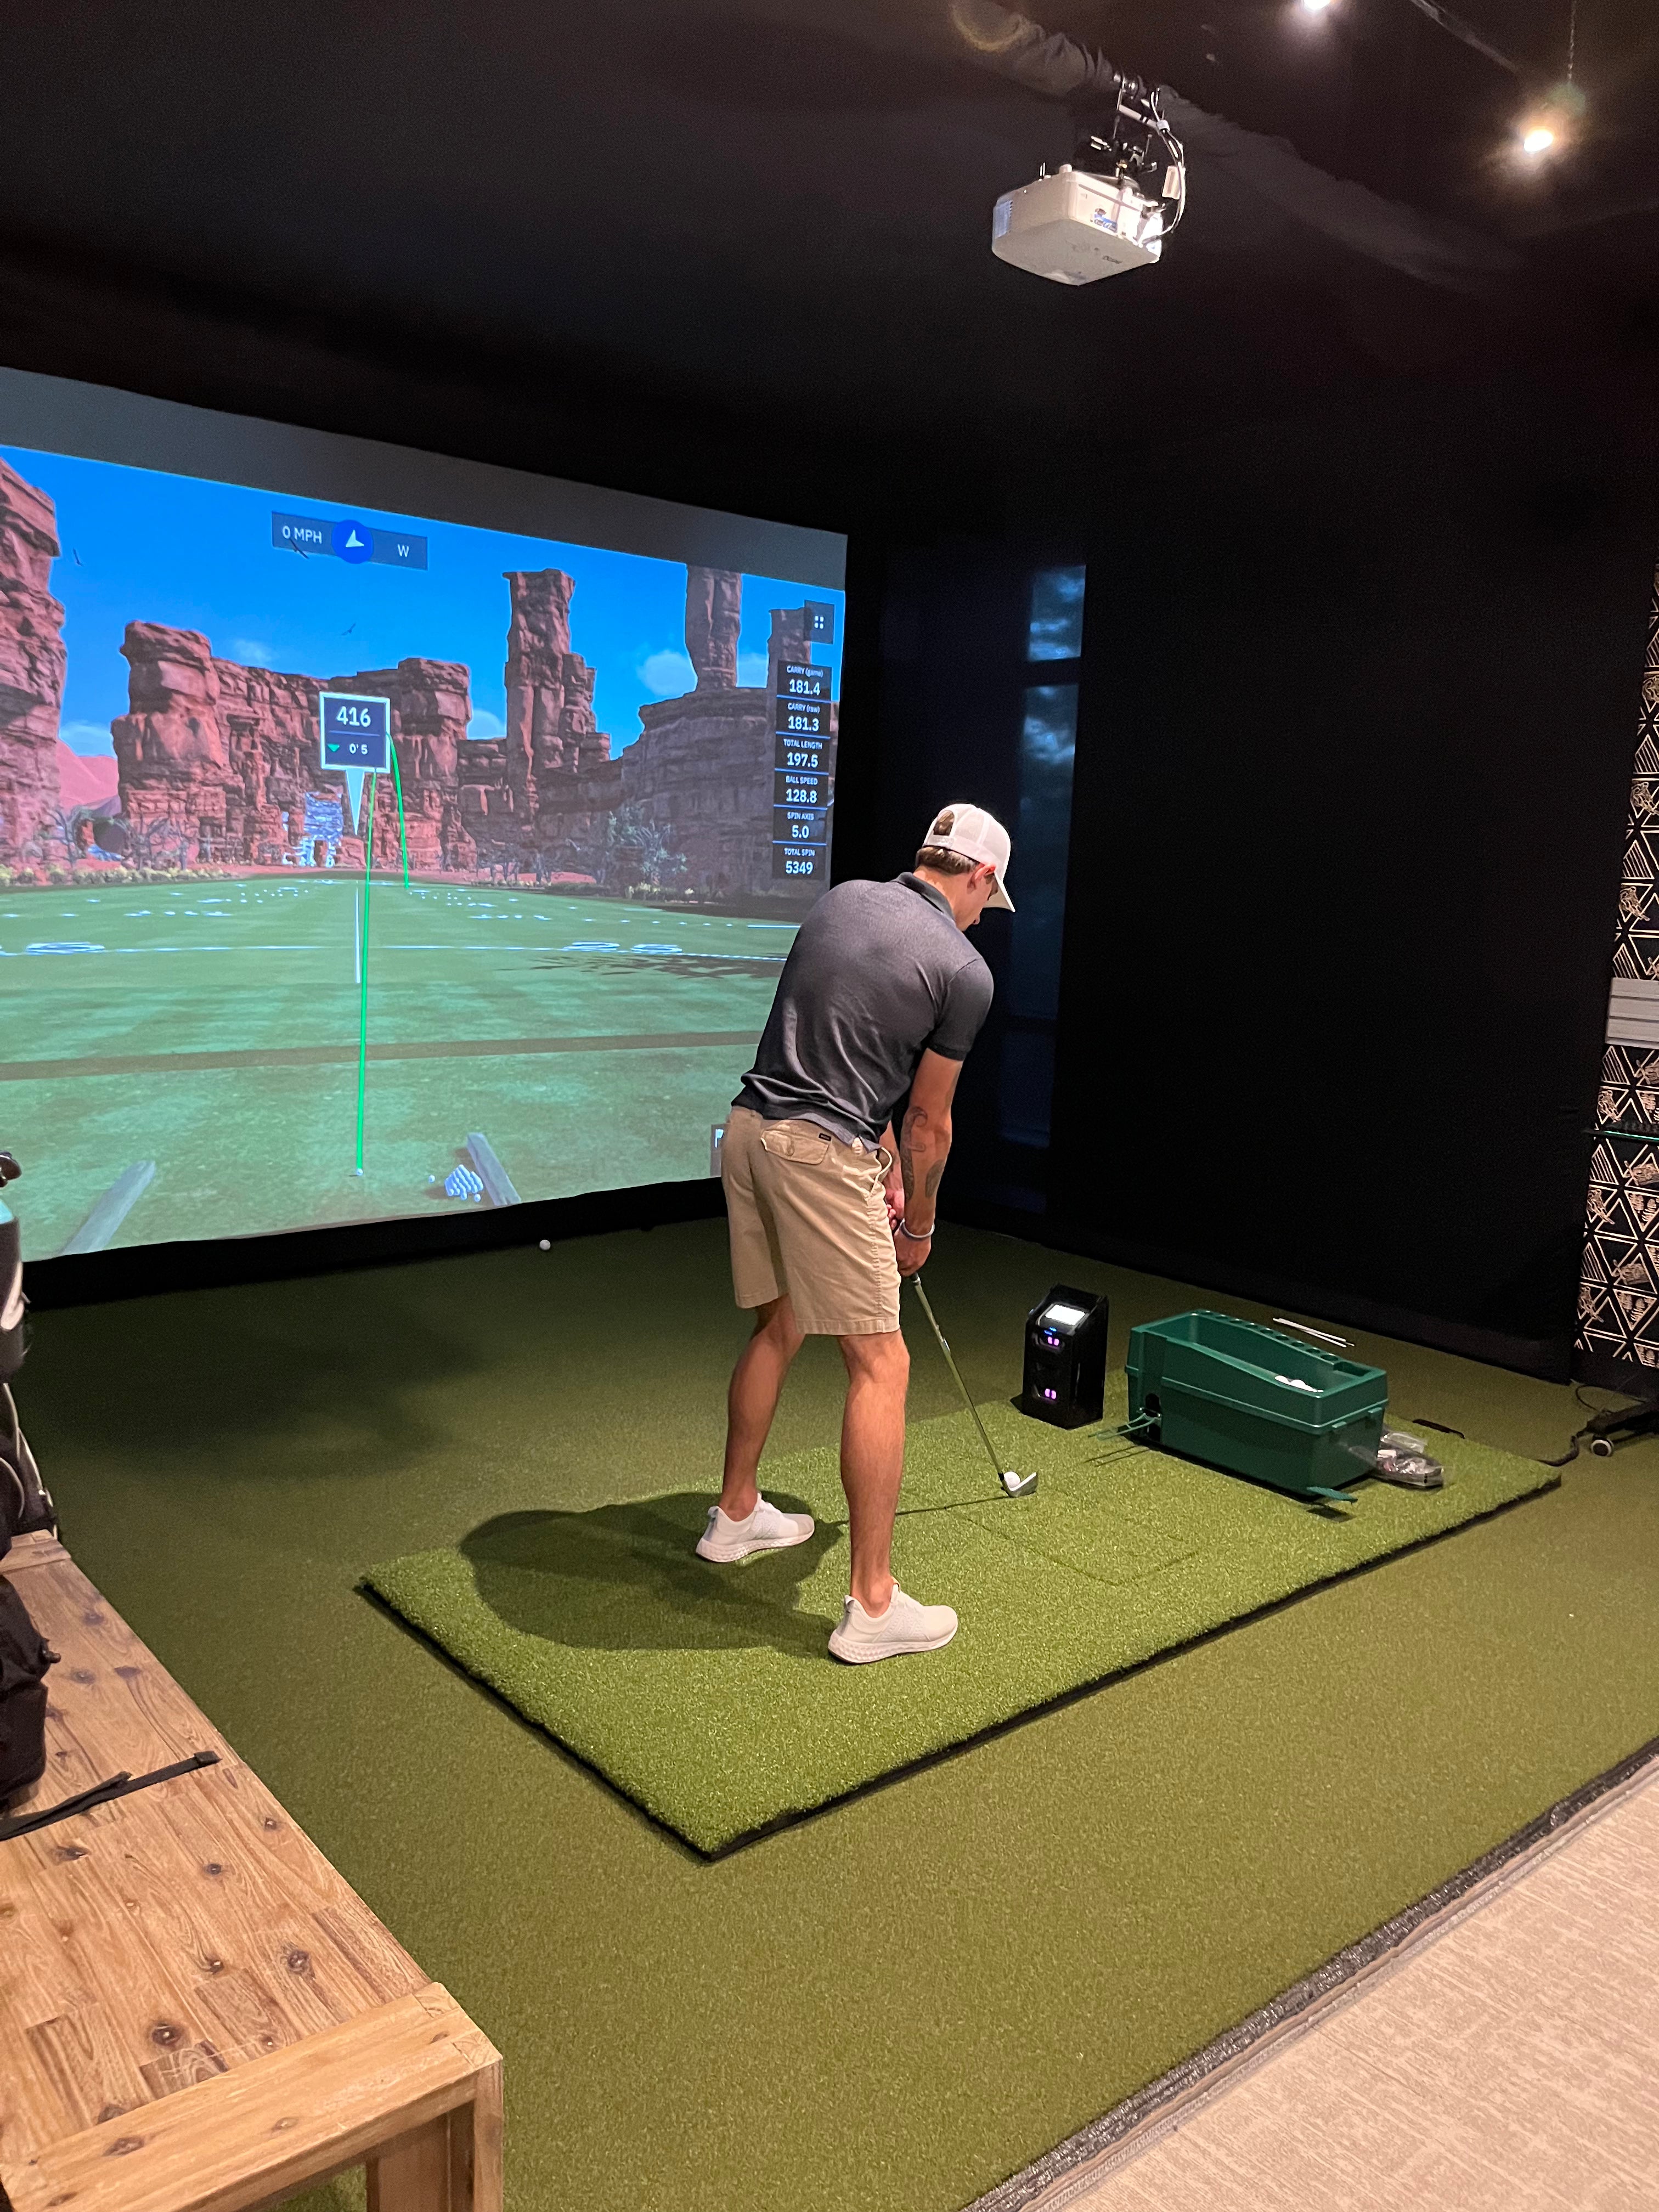 Golf on a large indoor golf simulator leased from Launch House Golf at Hotel Terra in Jackson Hole, Wyoming